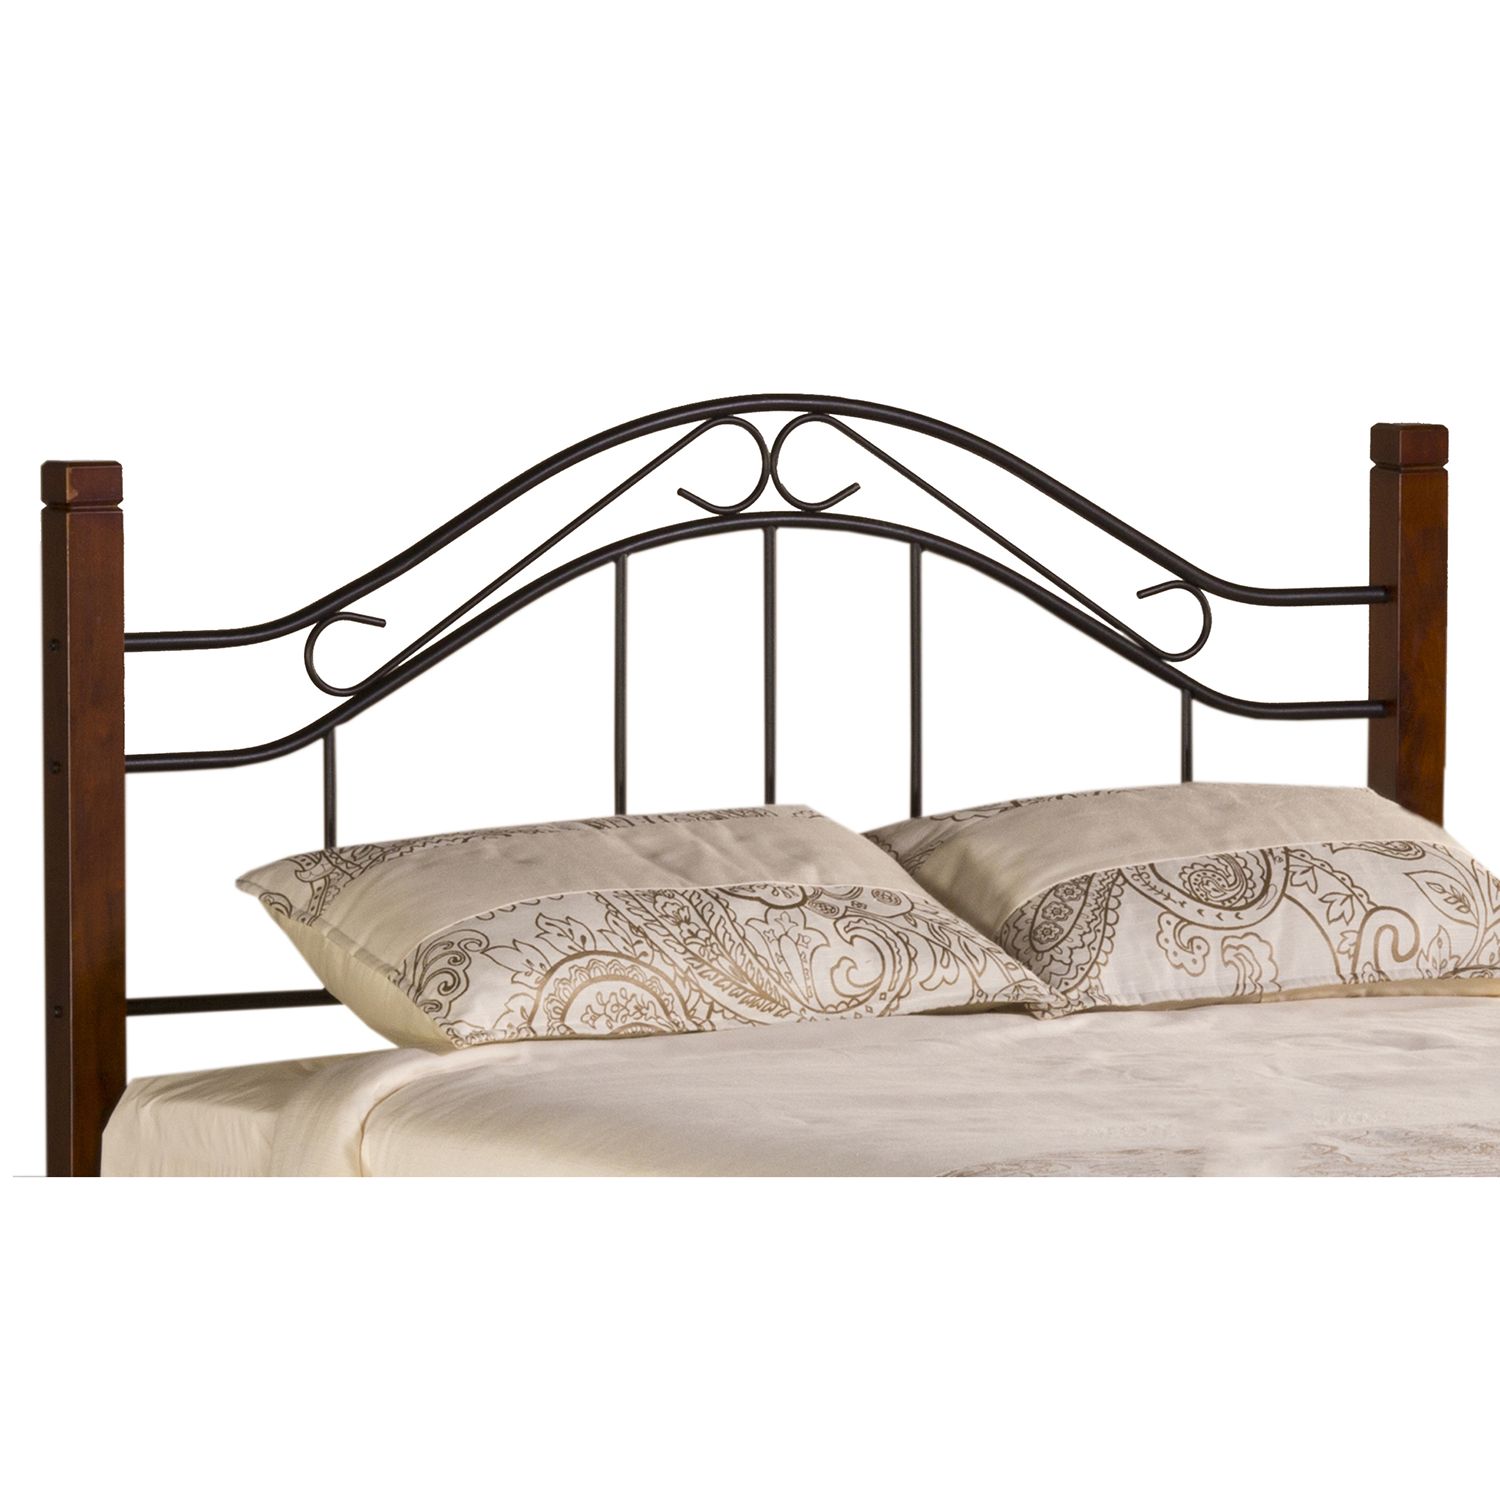 Image for Hillsdale Furniture Matson Twin Headboard at Kohl's.